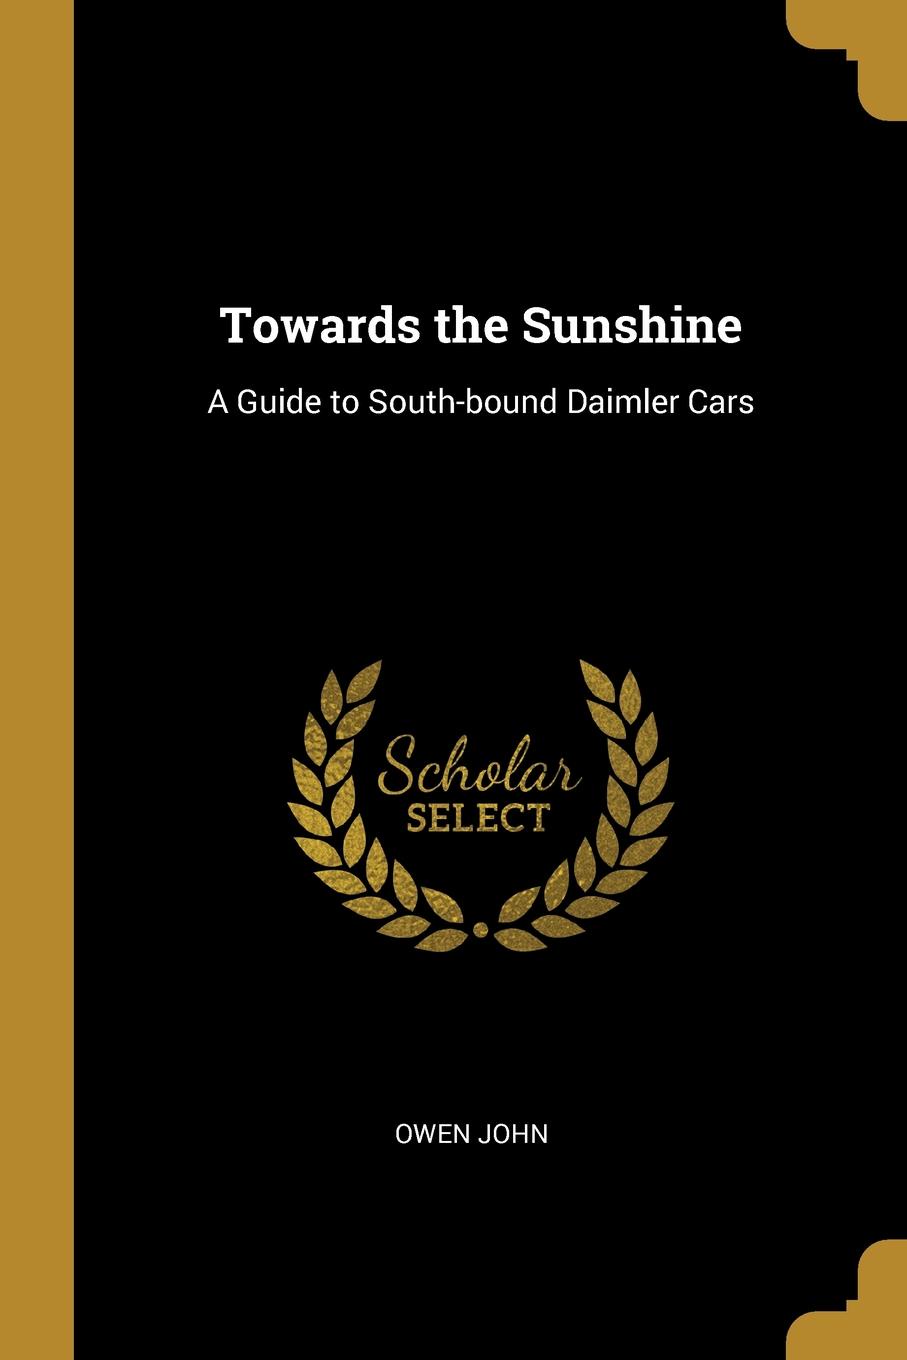 Towards the Sunshine. A Guide to South-bound Daimler Cars